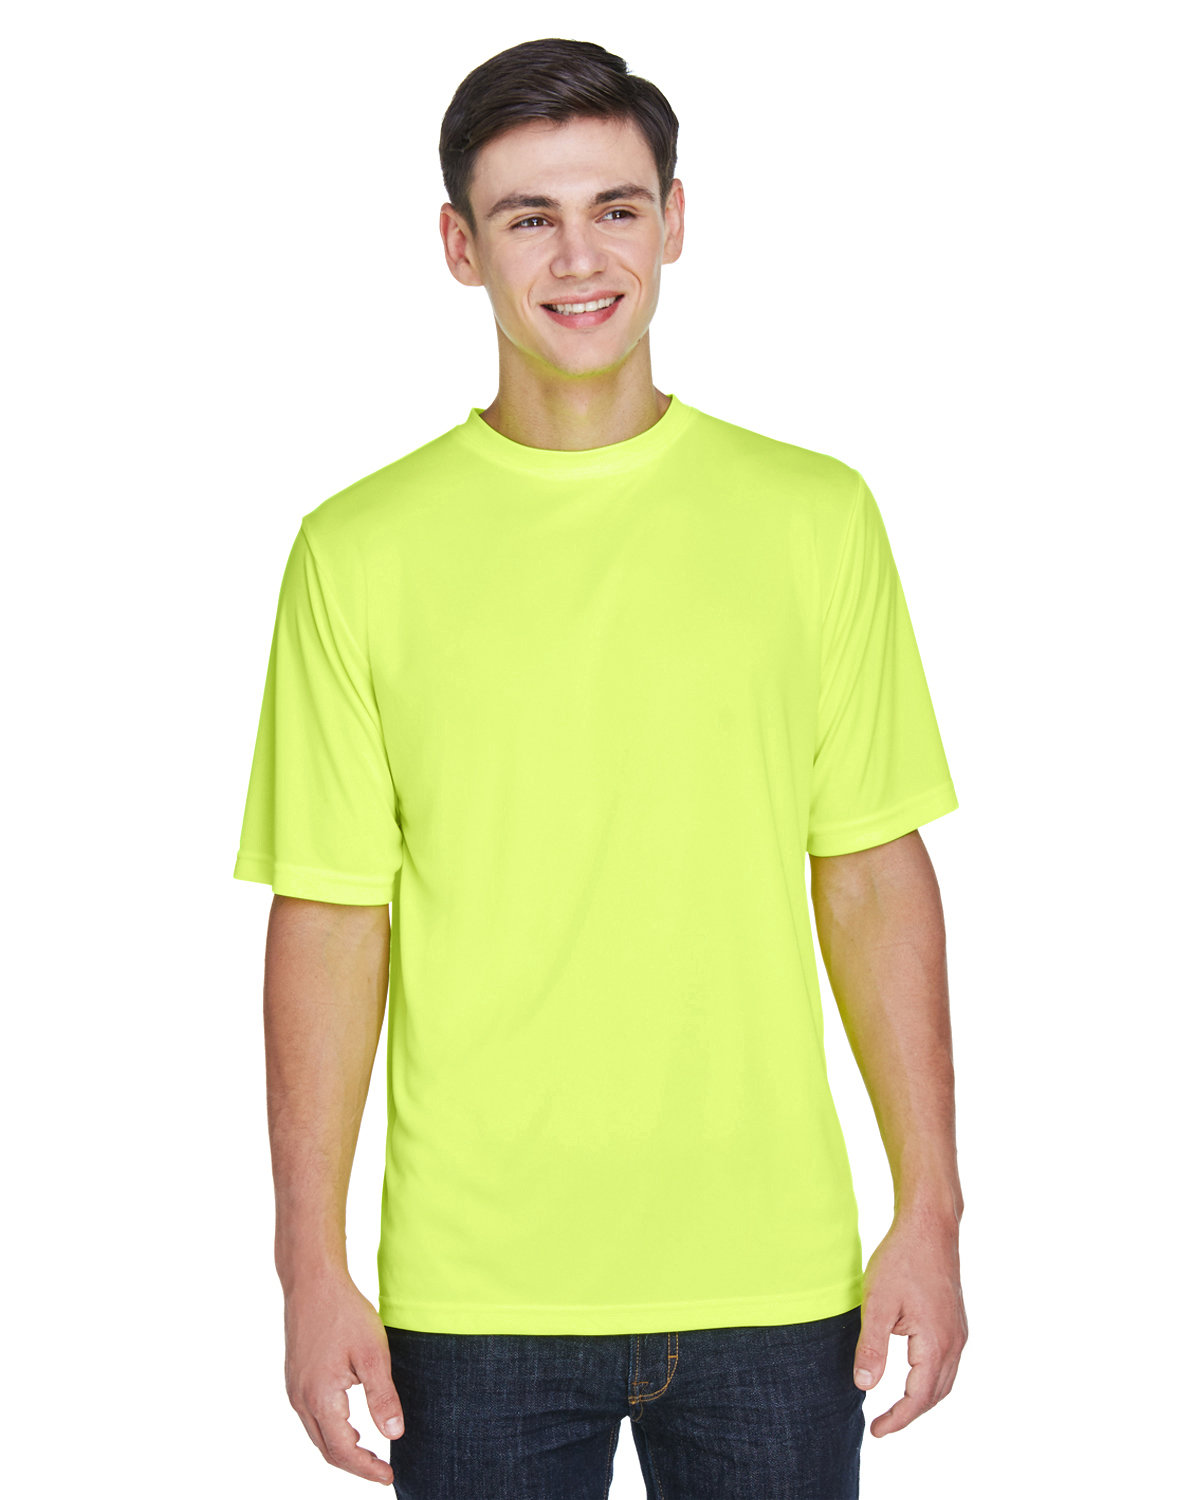 Team 365 Men's Zone Performance T-Shirt safety yellow 